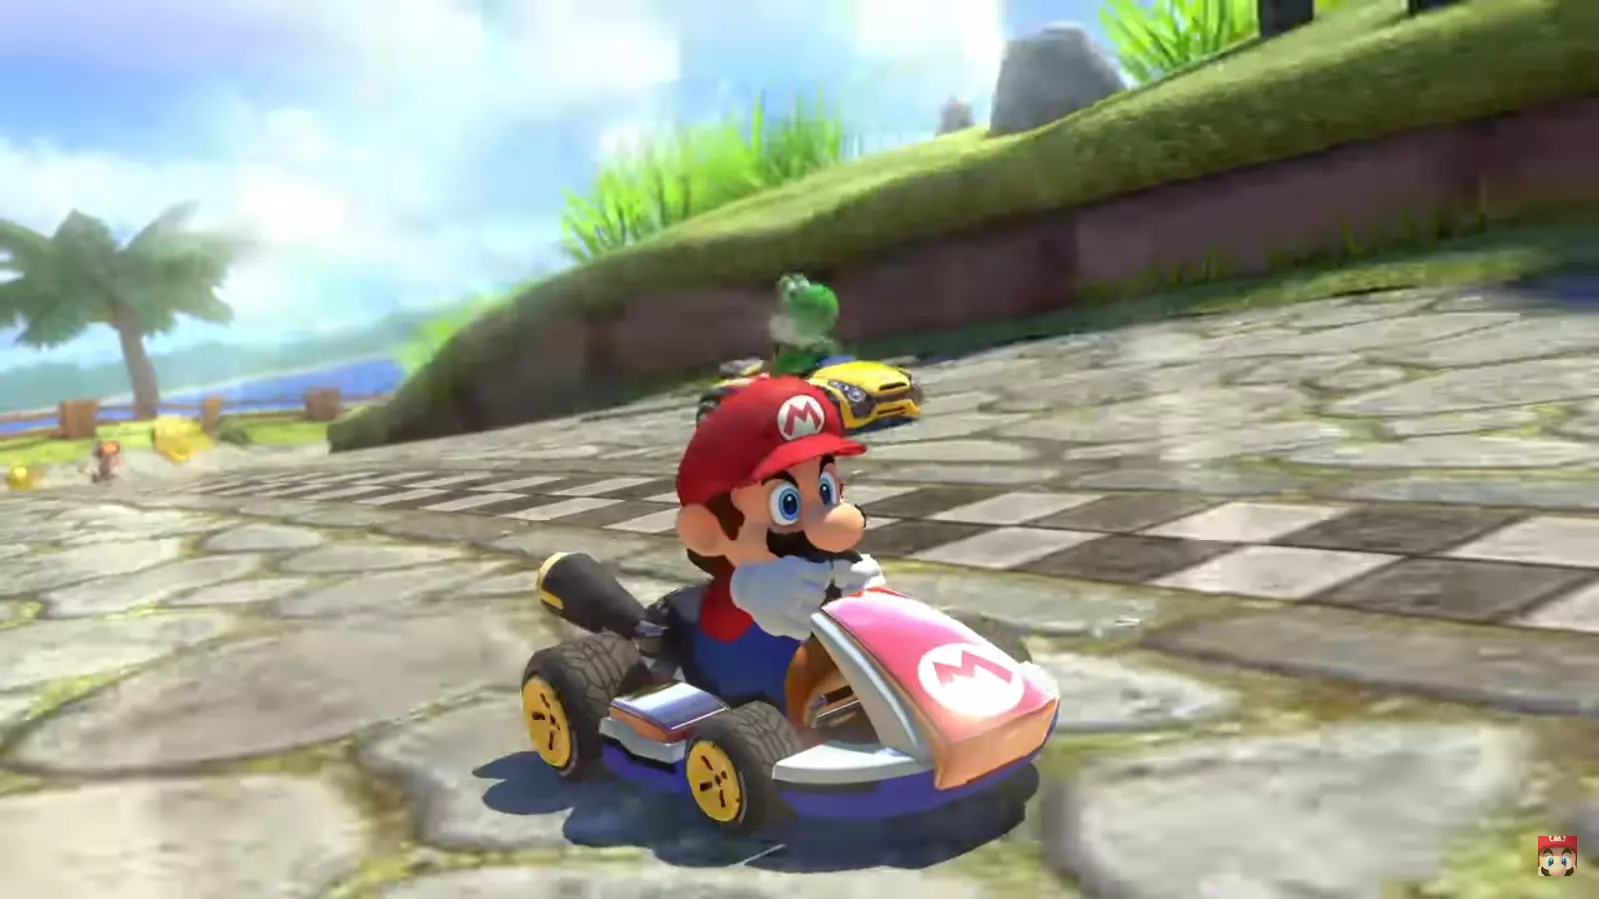 Real Life Mario Kart Coming to Houston in May